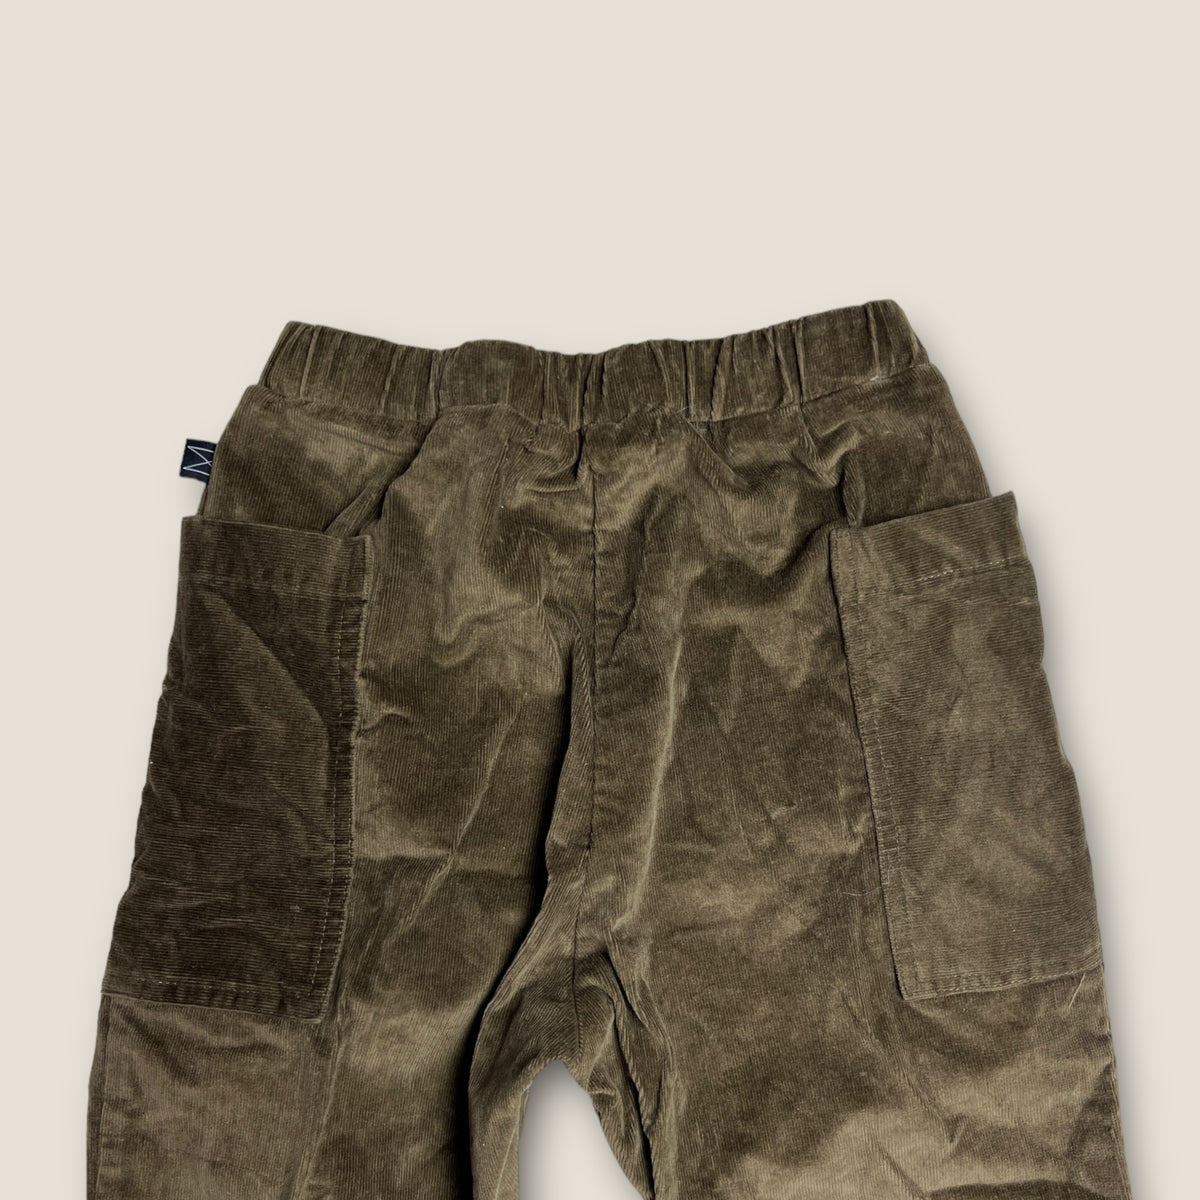 Monkind Corduroy Trouser size 7-8 years